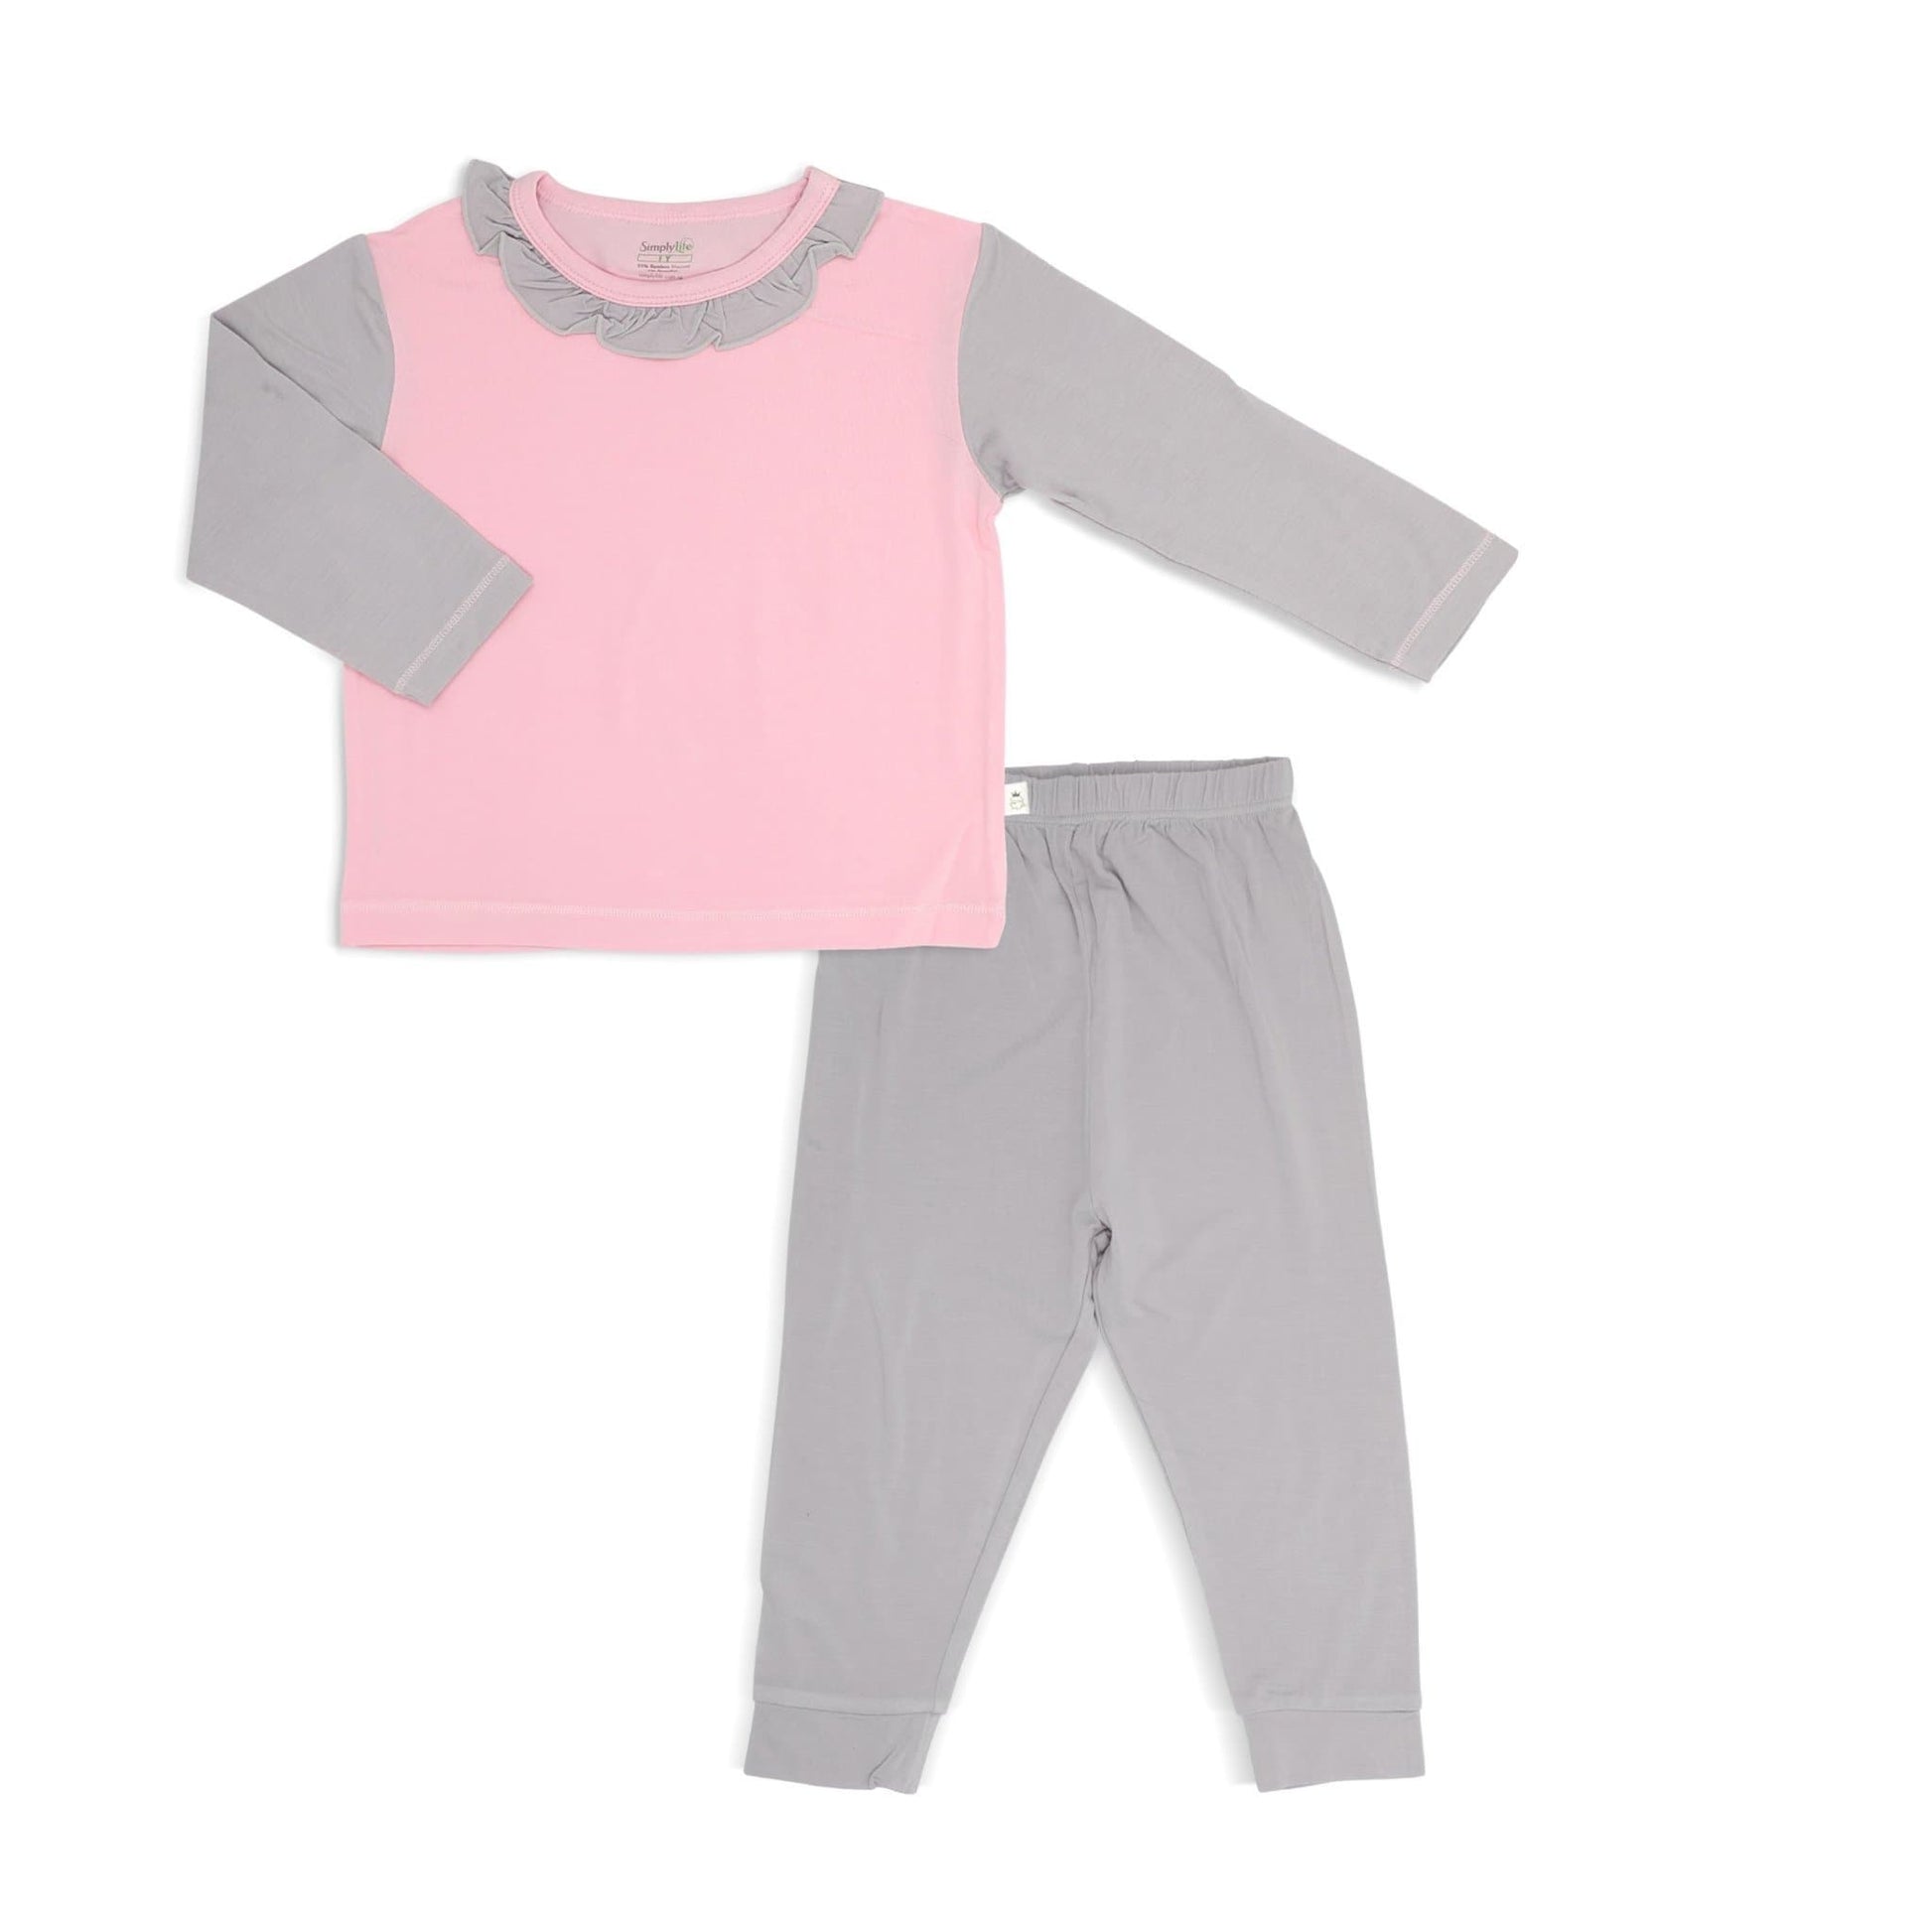 Pink & Grey - Pyjamas Set with Frilled Collar by simplylifebaby